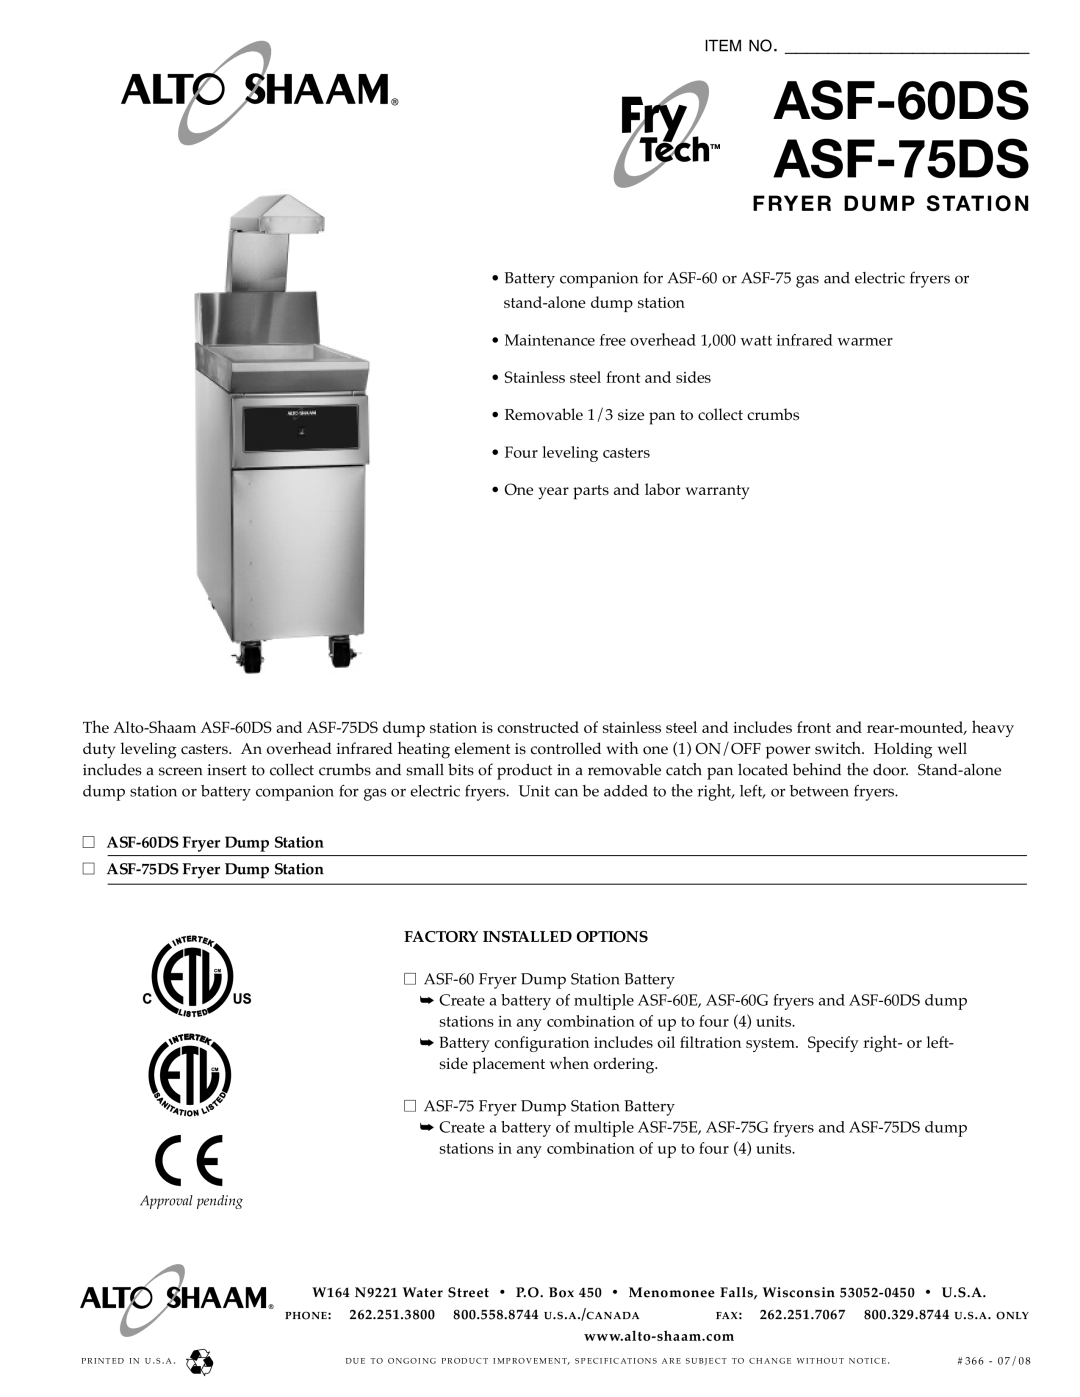 Alto-Shaam specifications ASF-60DS ASF-75DS, Fryer Dump Stati On, ASF-60DSFryer Dump Station ASF-75DSFryer Dump Station 